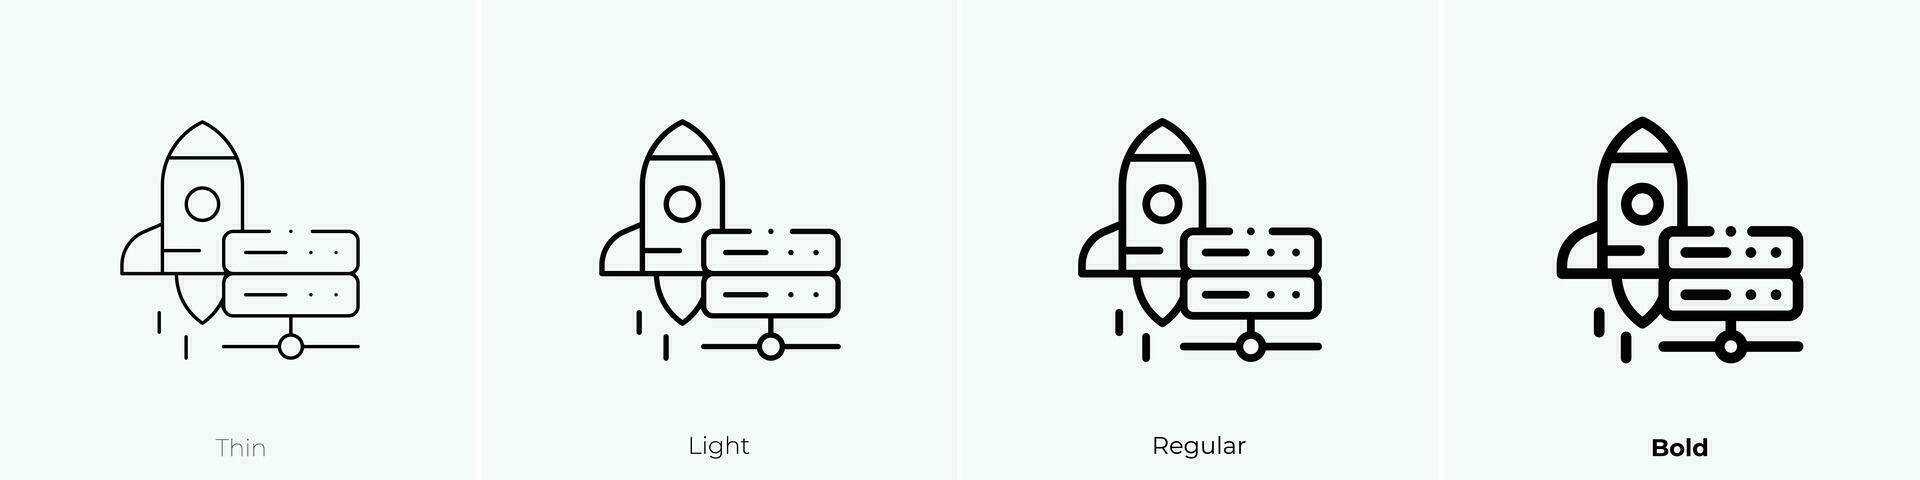 server icon. Thin, Light, Regular And Bold style design isolated on white background vector